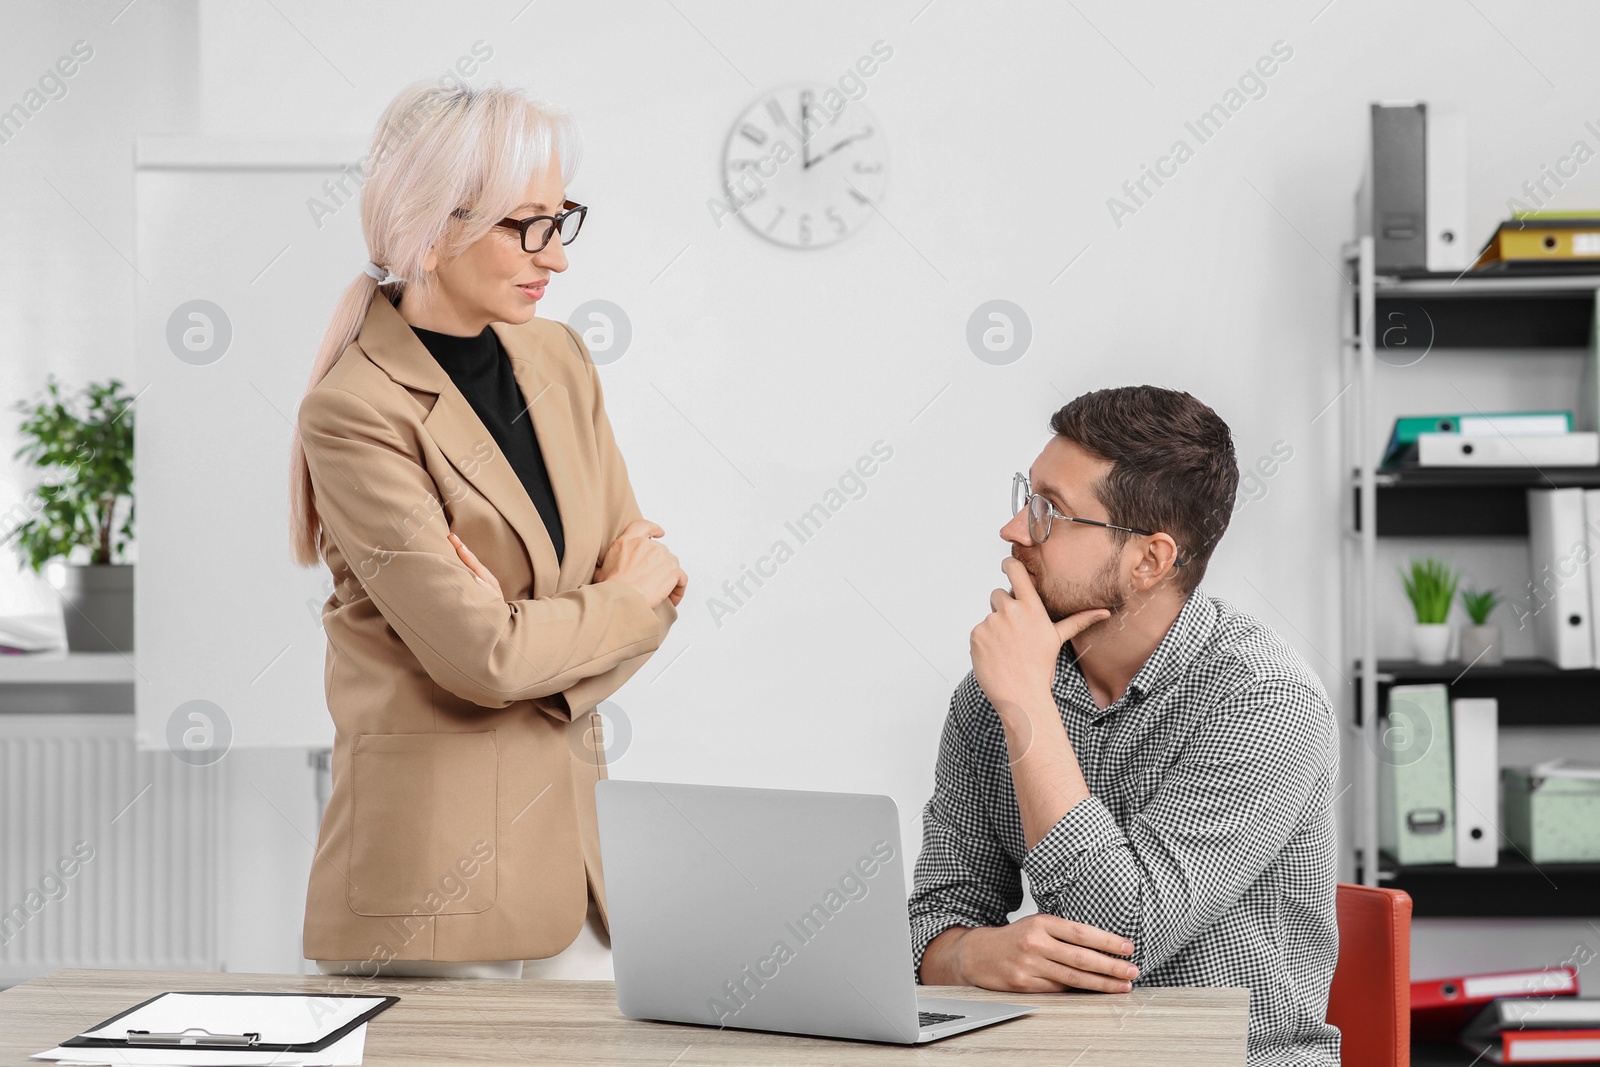 Photo of Boss and employee discussing work issues in office